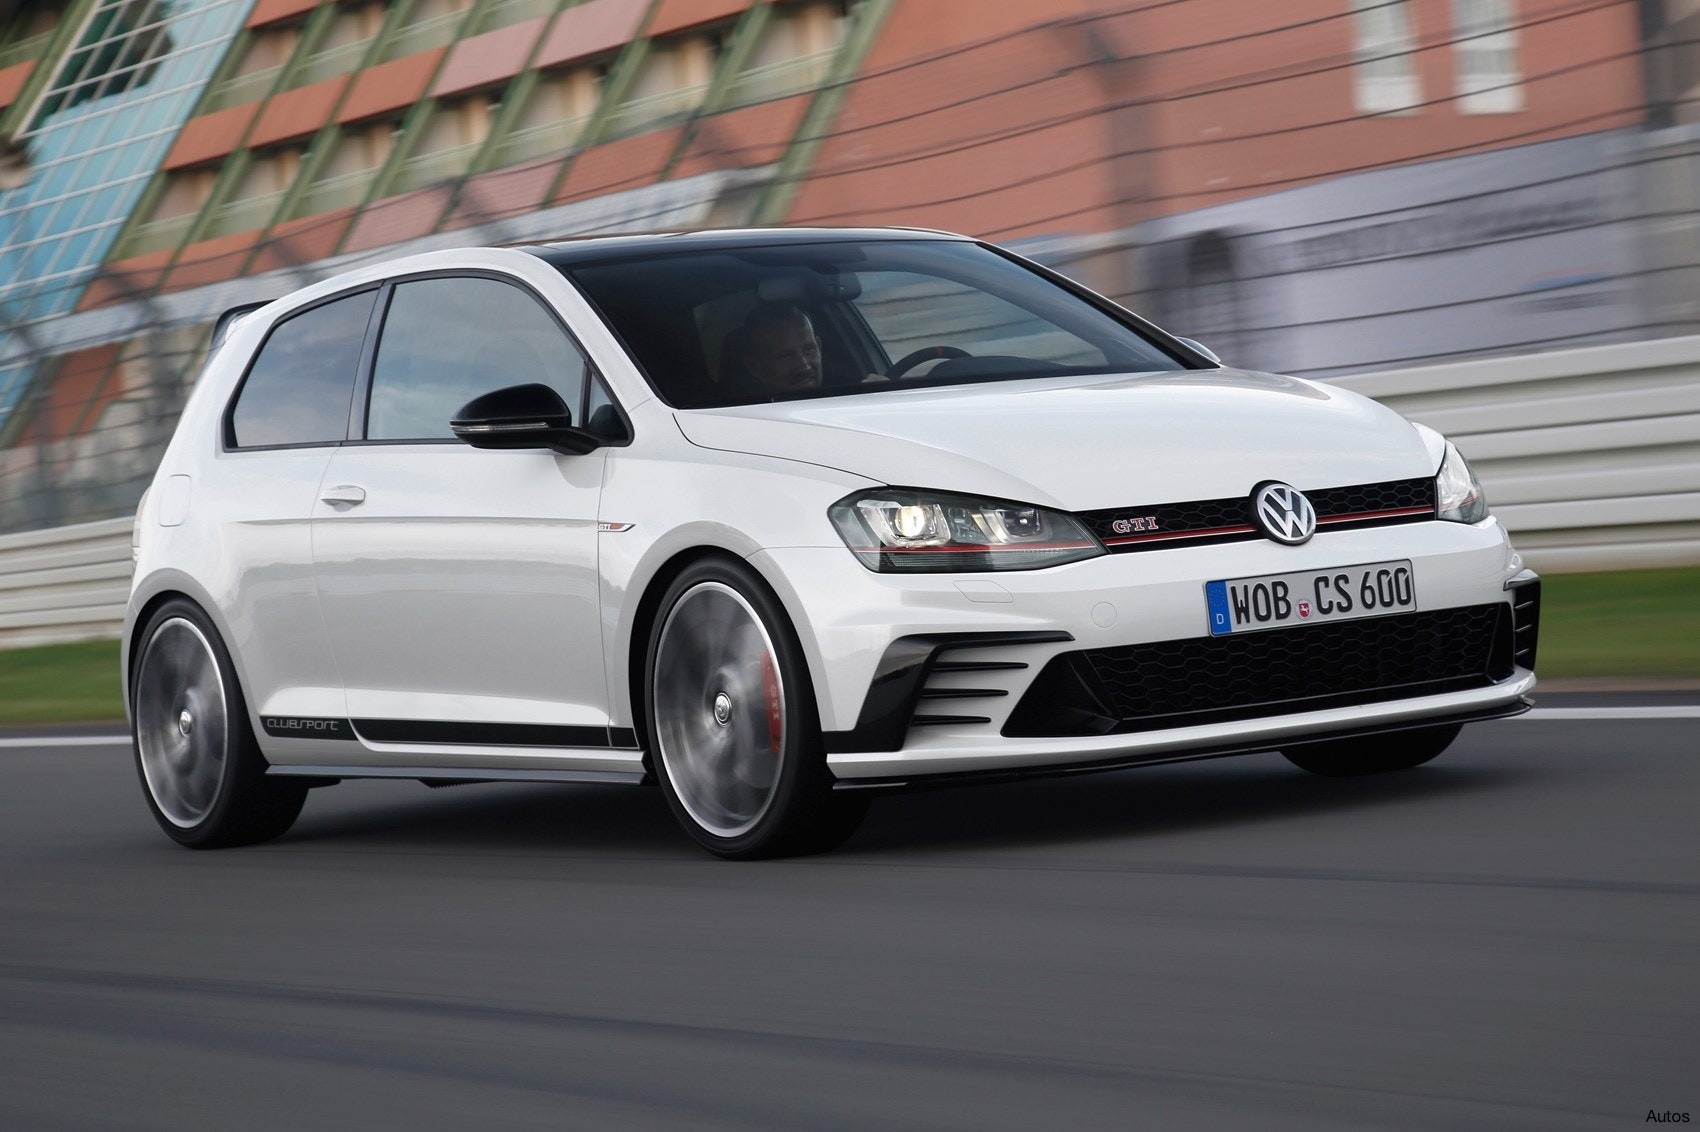 Best Gallery of Take A Look About Golf Gti 2011 with Extraordinary Gallery